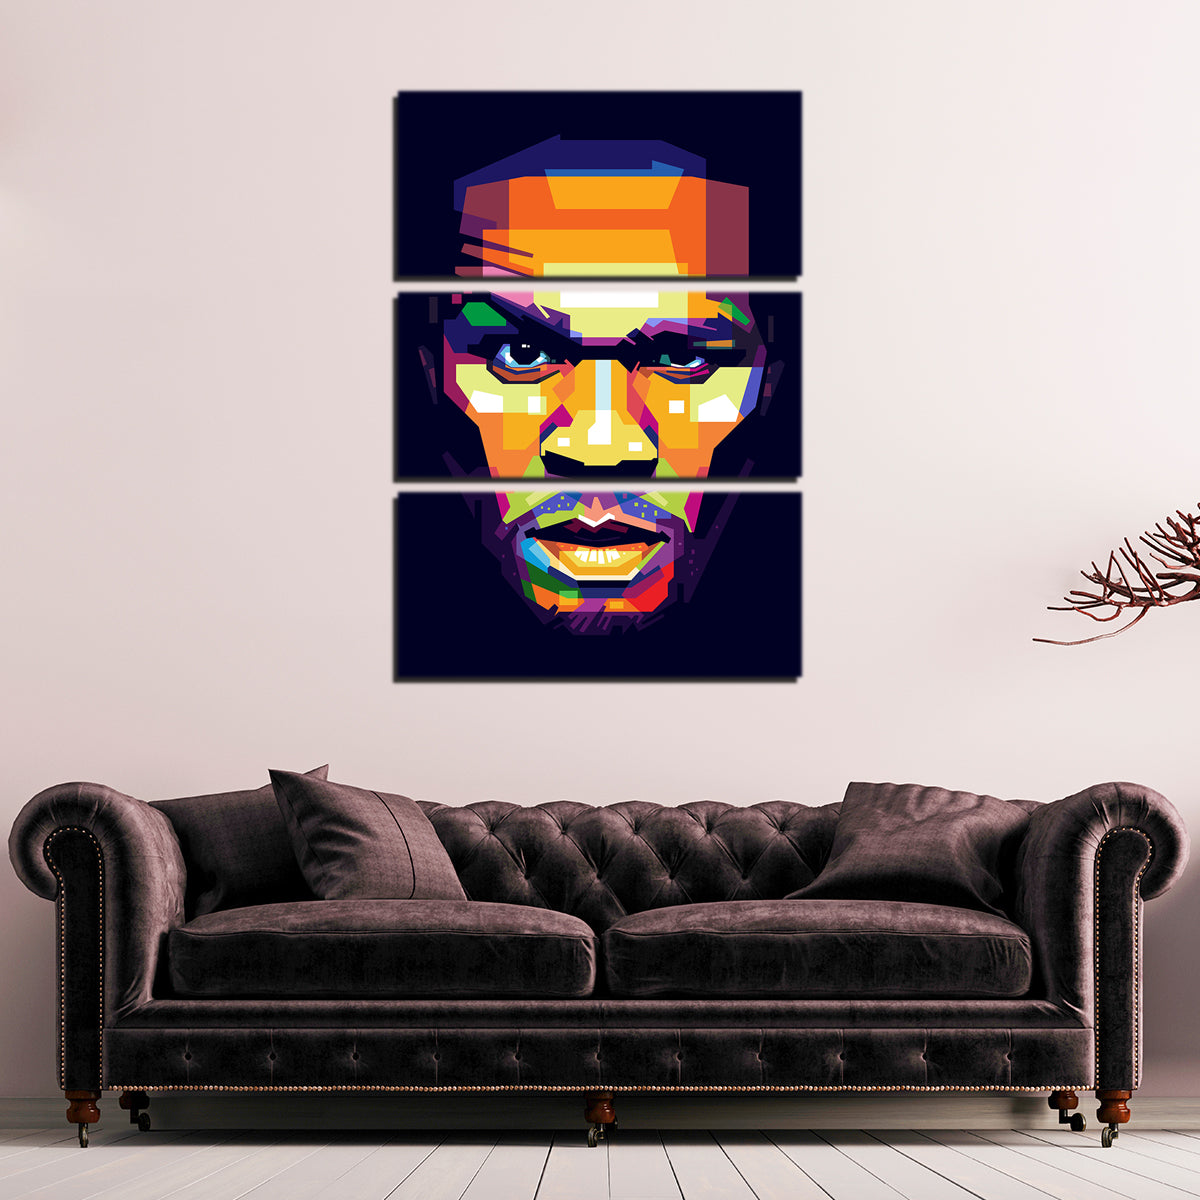 His Majesty 50 Cent – Legendary Wall Art